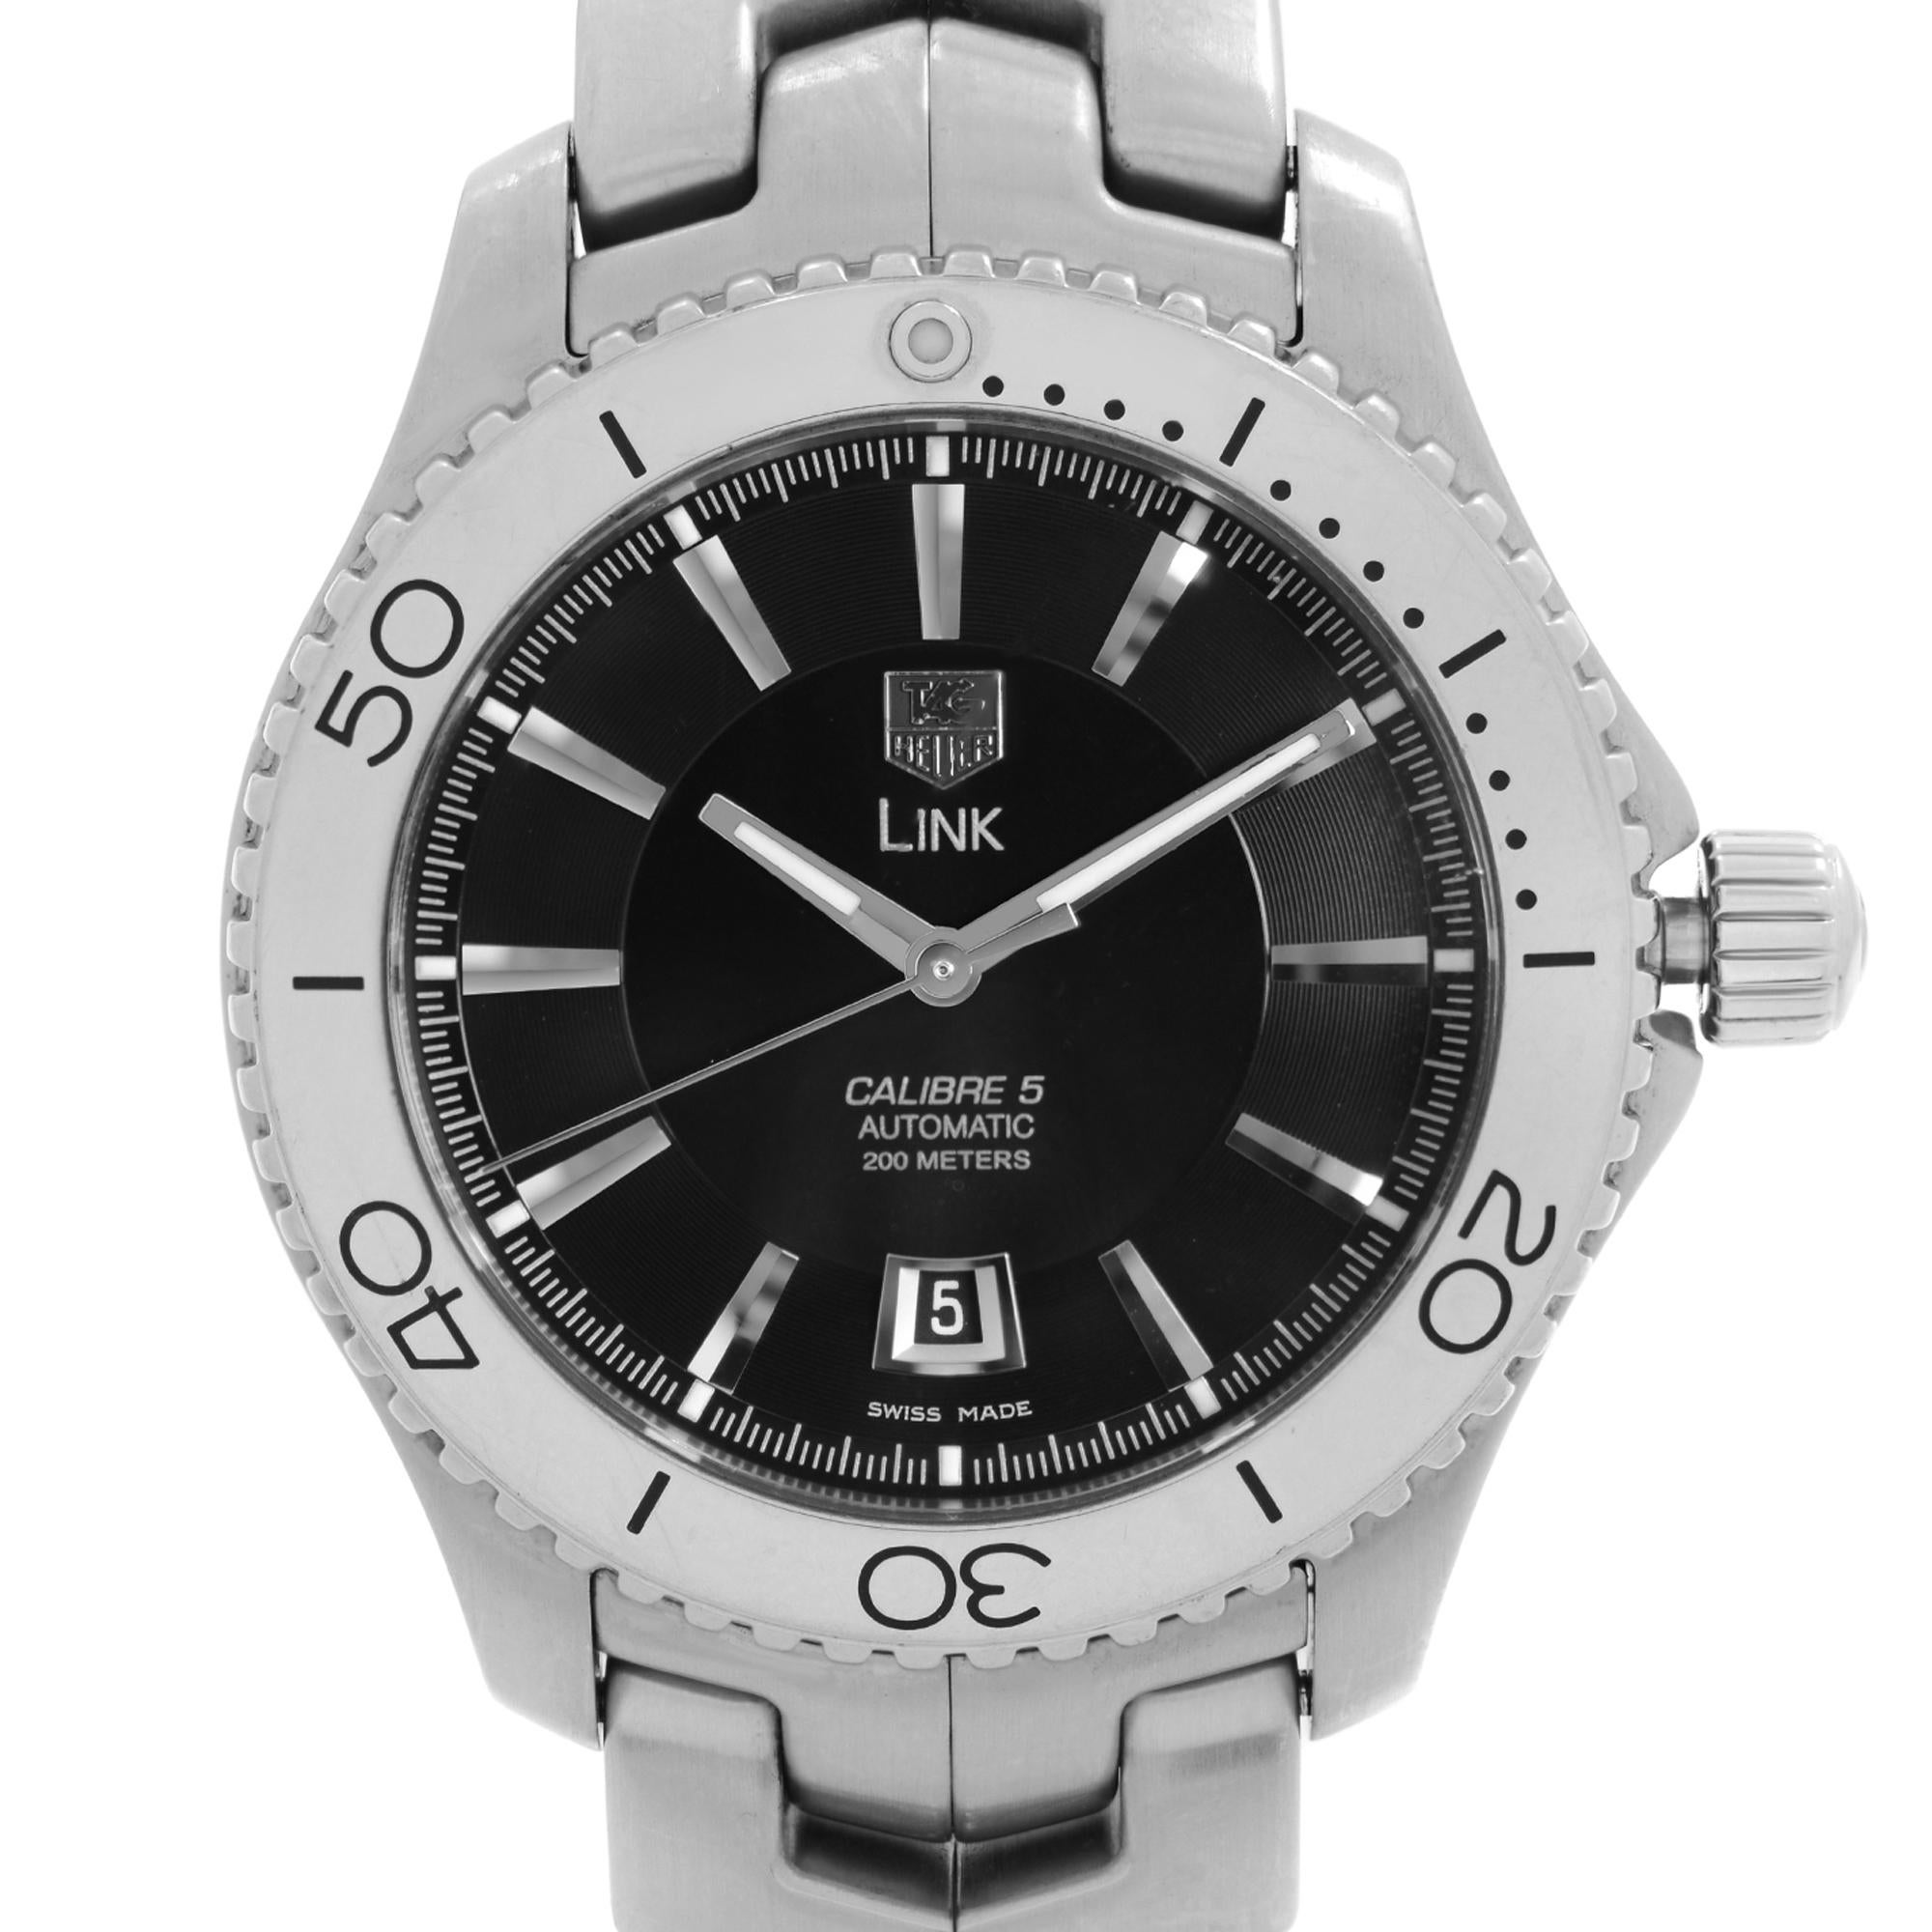 Pre-owned Tag Heuer Link Stainless Steel Black Dial Automatic Men's Watch WJ201A.BA0591. This Beautiful Timepiece is Powered by Mechanical (Automatic) Movement And Features: Round Stainless Steel Case & Bracelet, Unidirectional Rotating Stainless